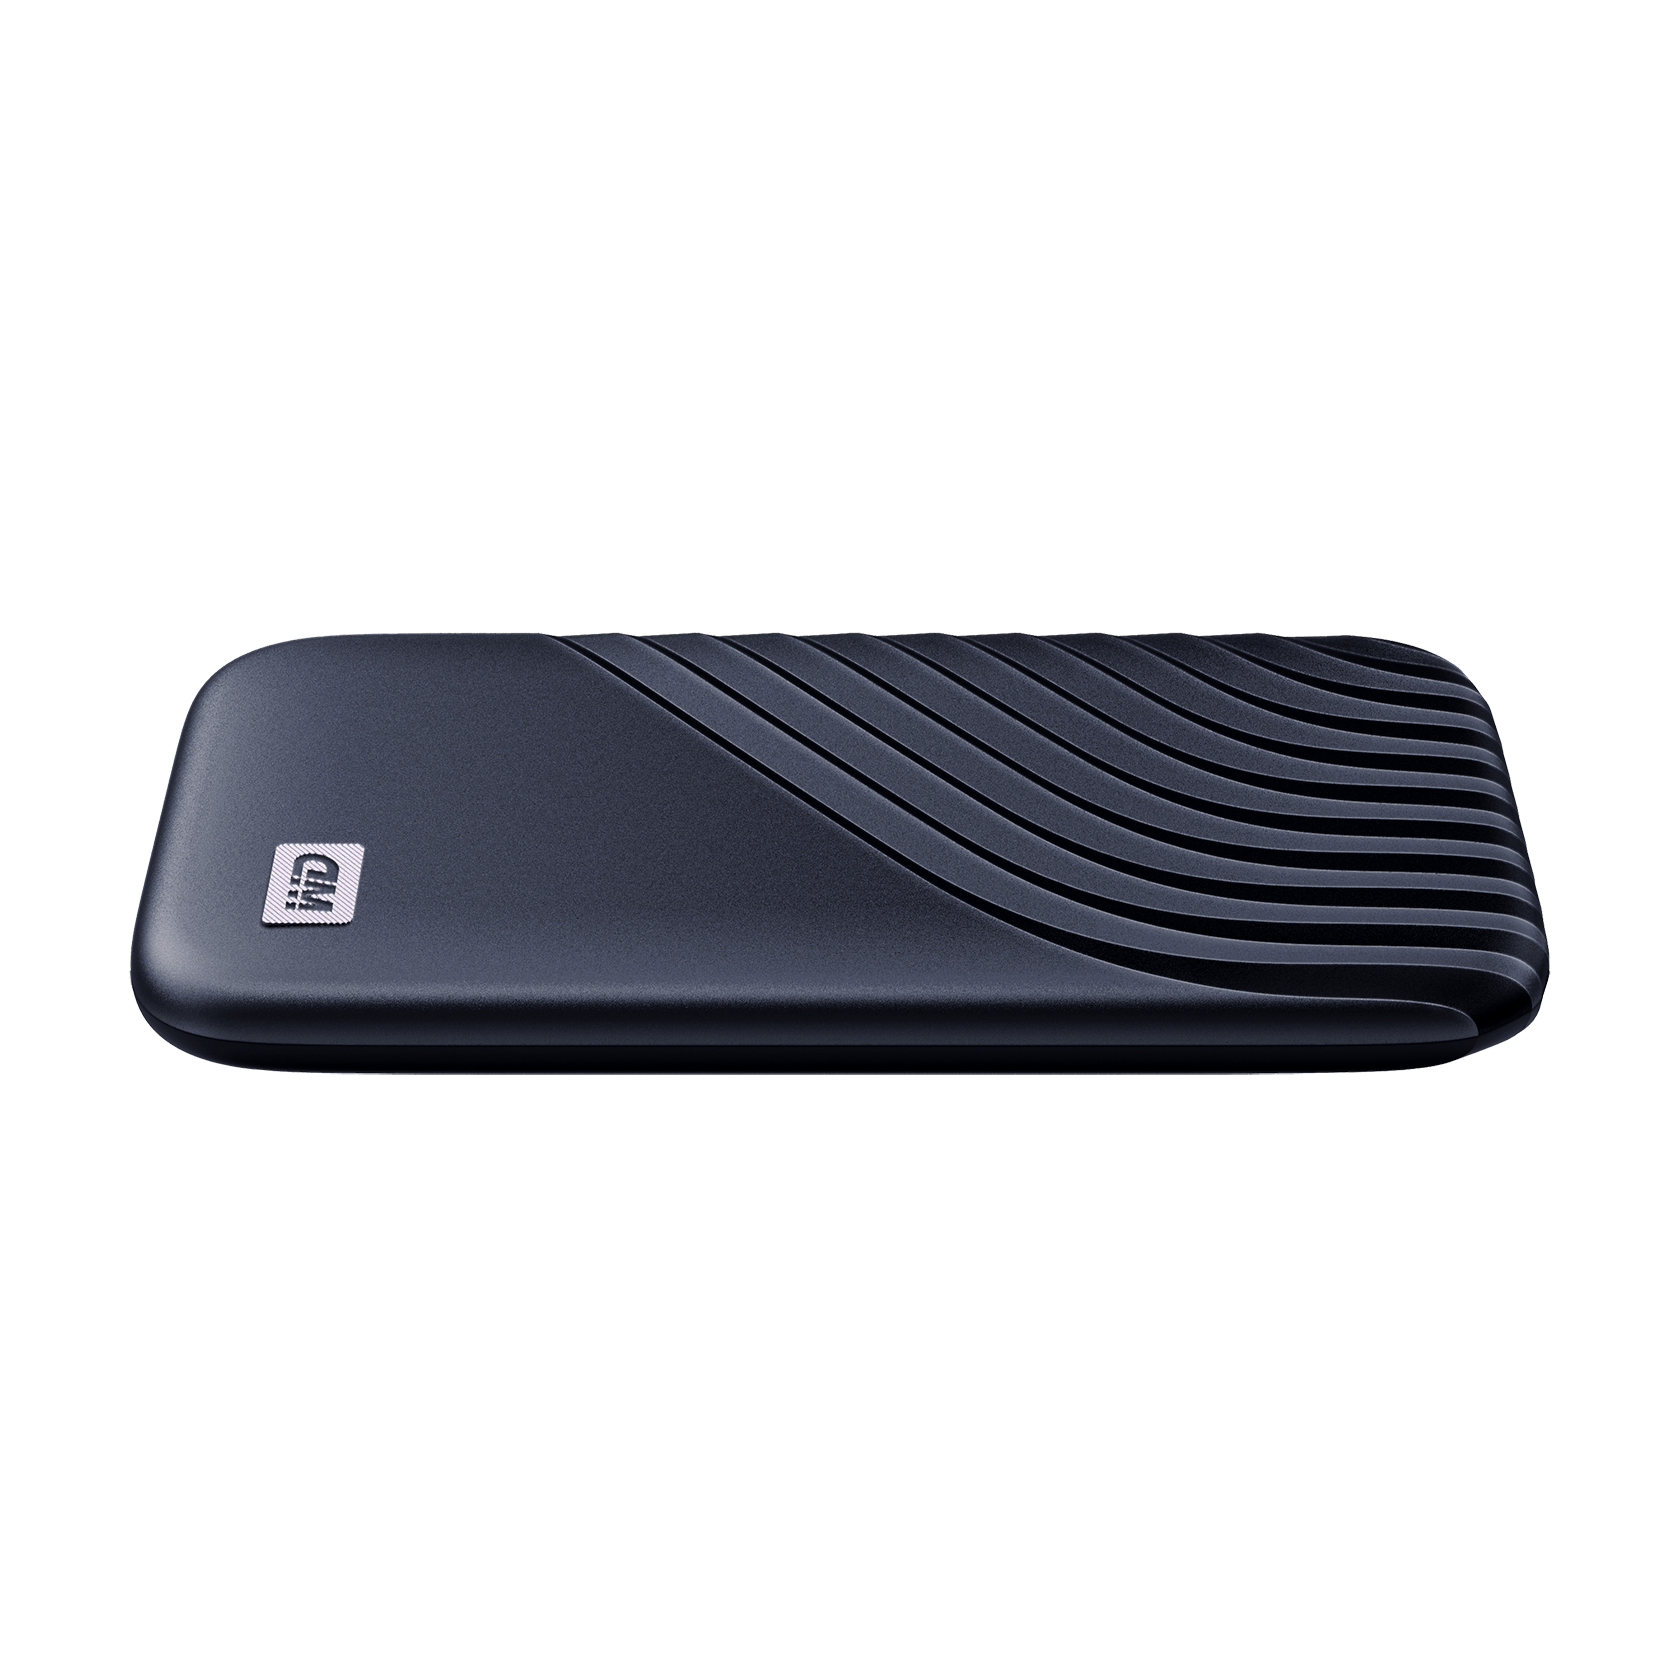 WD 1TB My Passport SSD, Portable External Solid State Drive, Blue - WDBAGF0010BBL-WESN - image 5 of 8